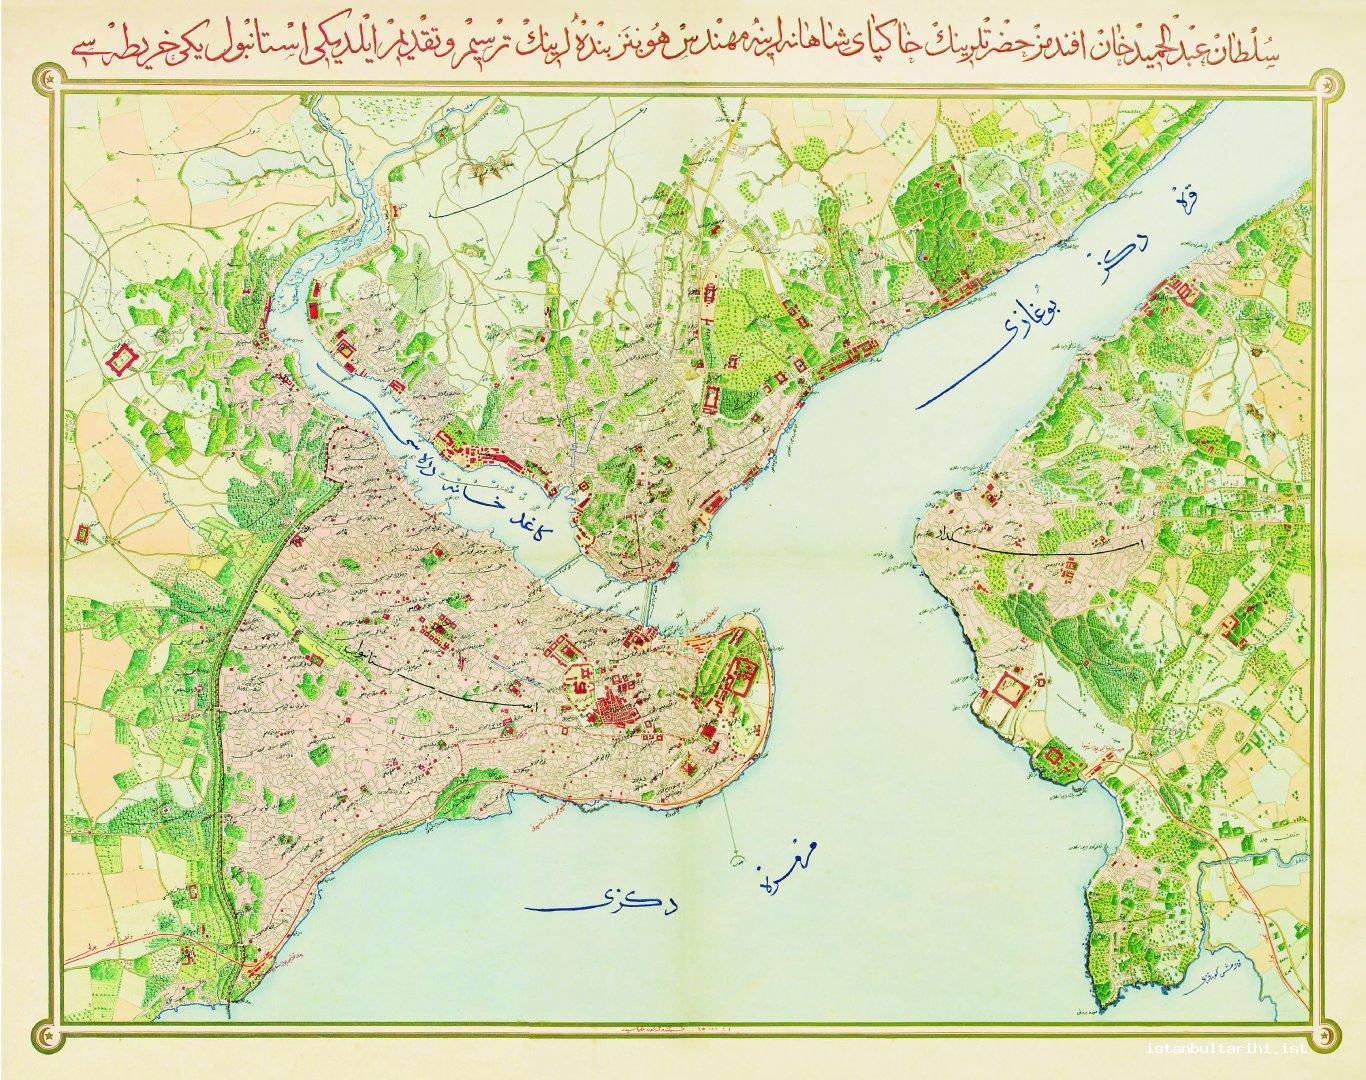 1- Istanbul map presented by engineer Hübner to Sultan Abdülhamid II (Istanbul University, Rare Books and Special Collections Library, Maps Section)  